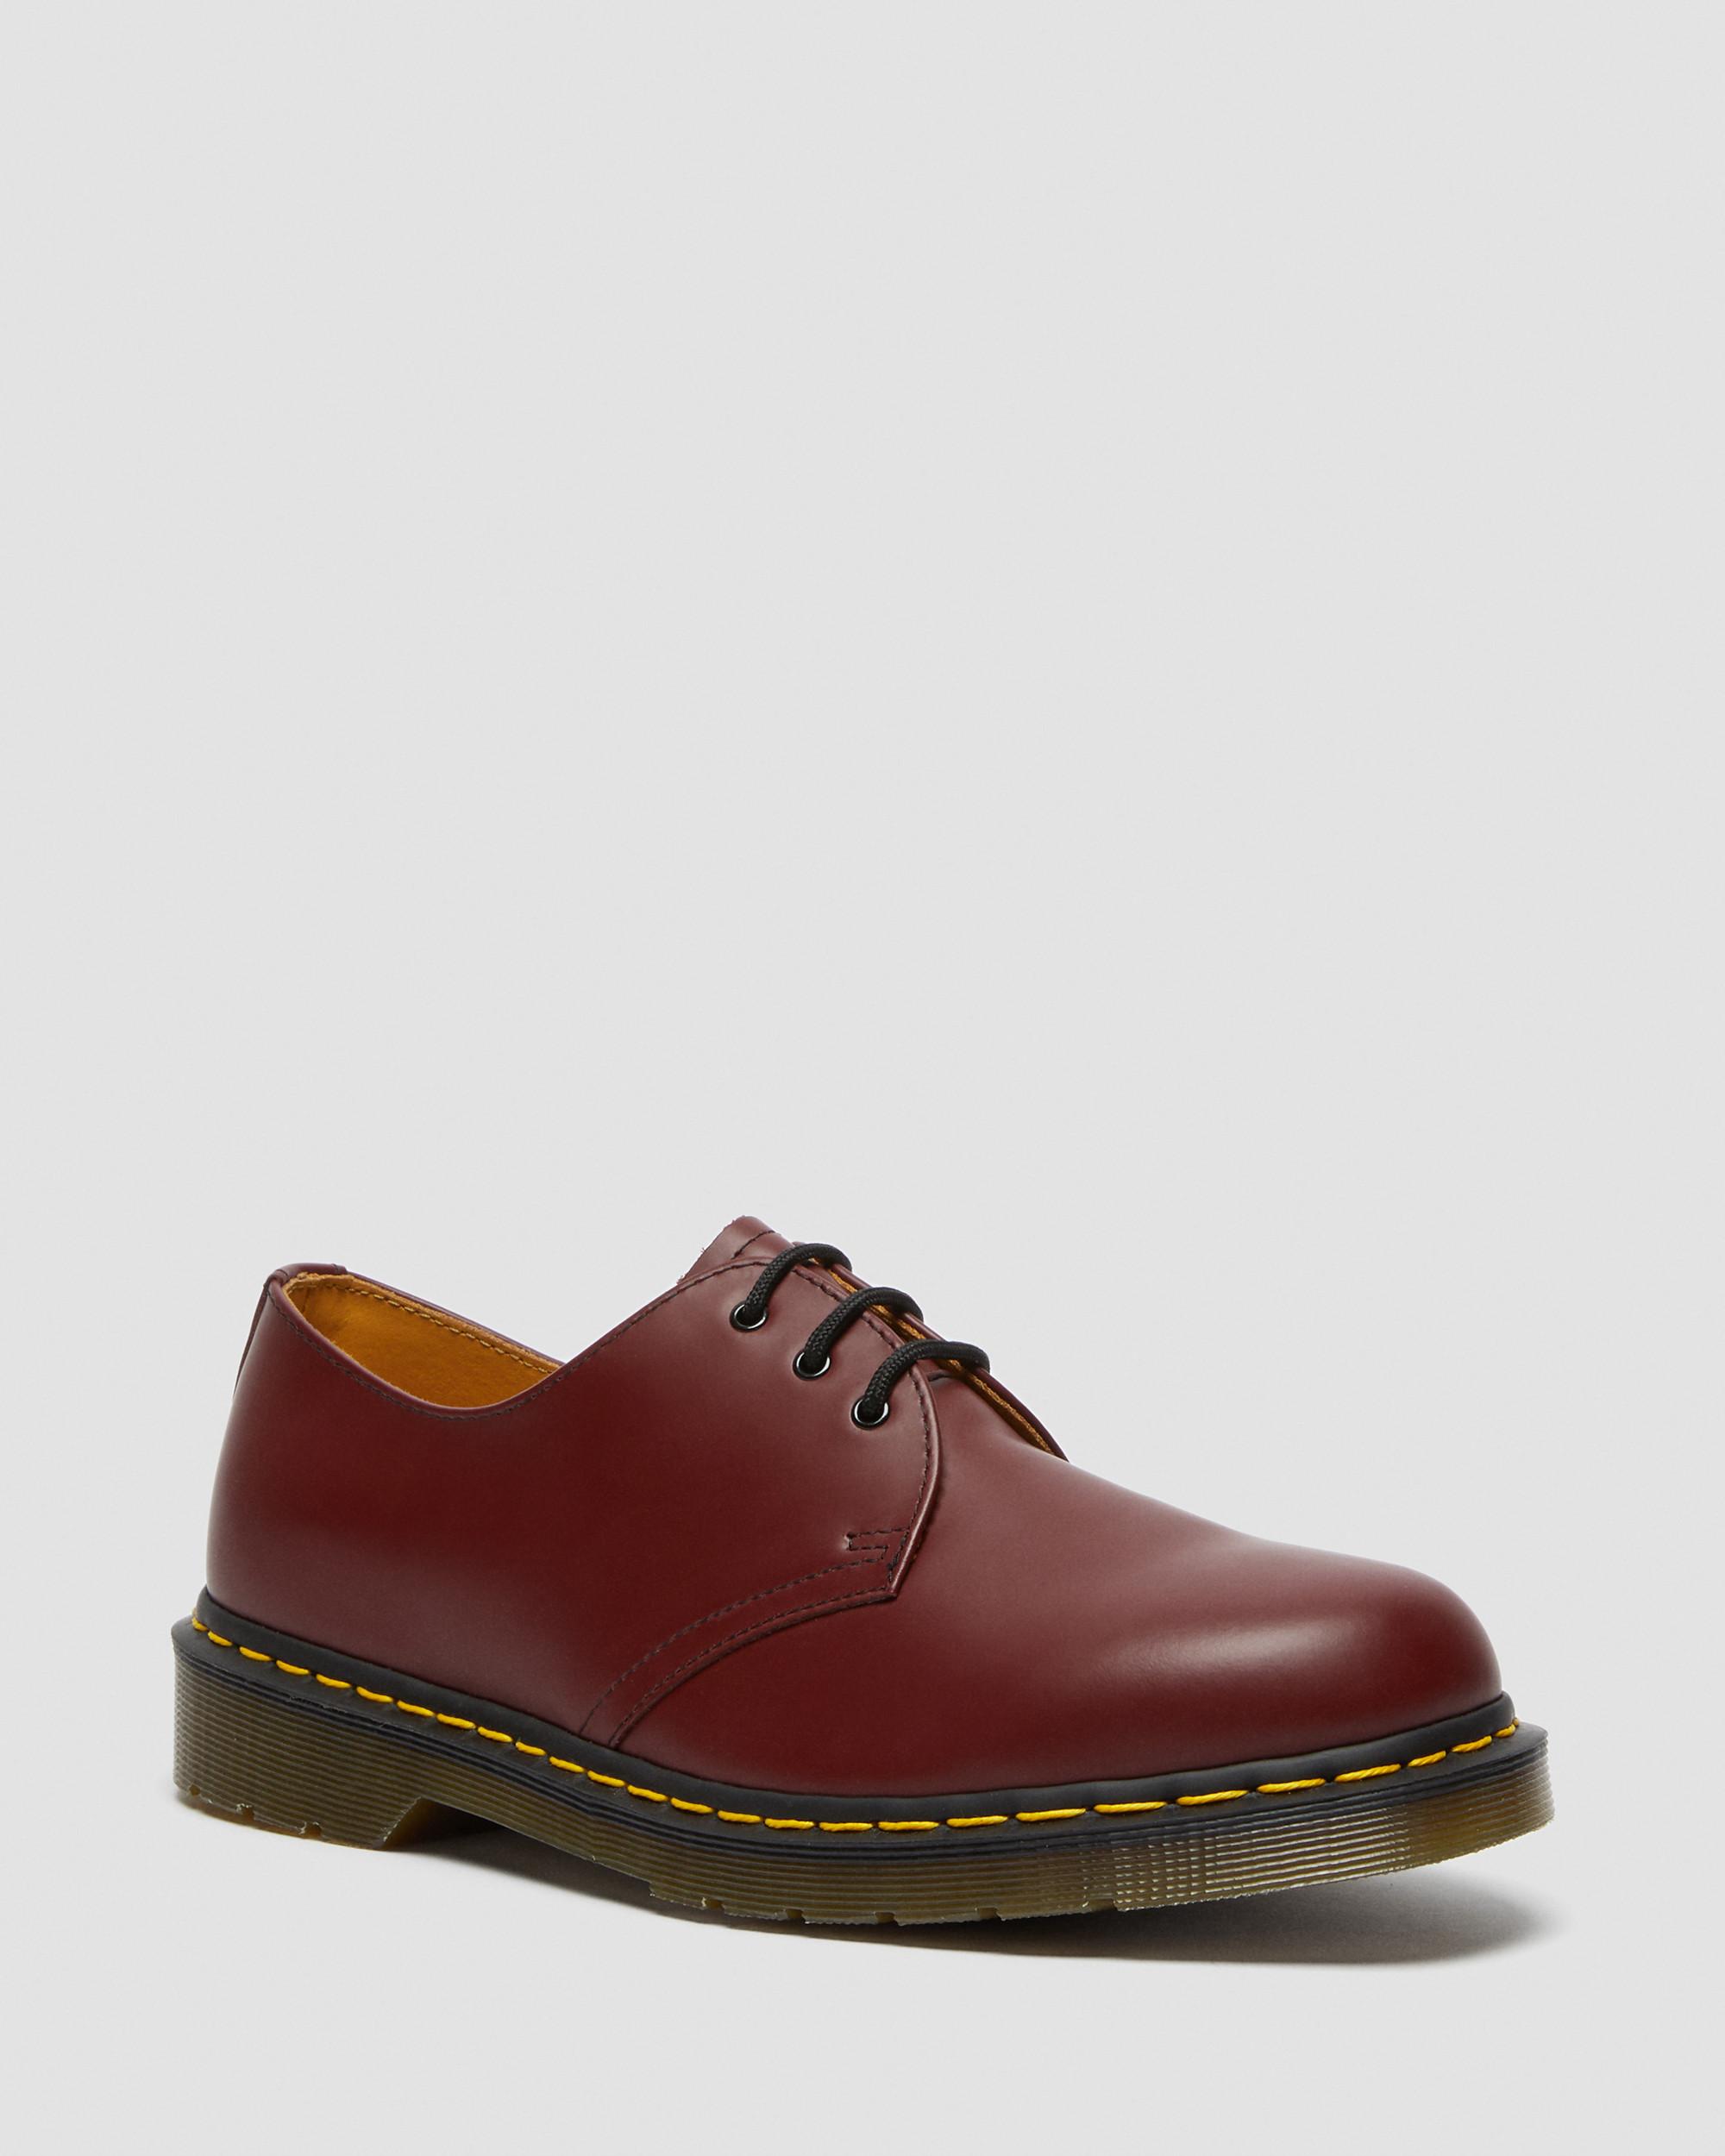 1461 Smooth Leather Oxford ShoesNahkaiset 1461 Smooth Oxford -kengät Dr. Martens